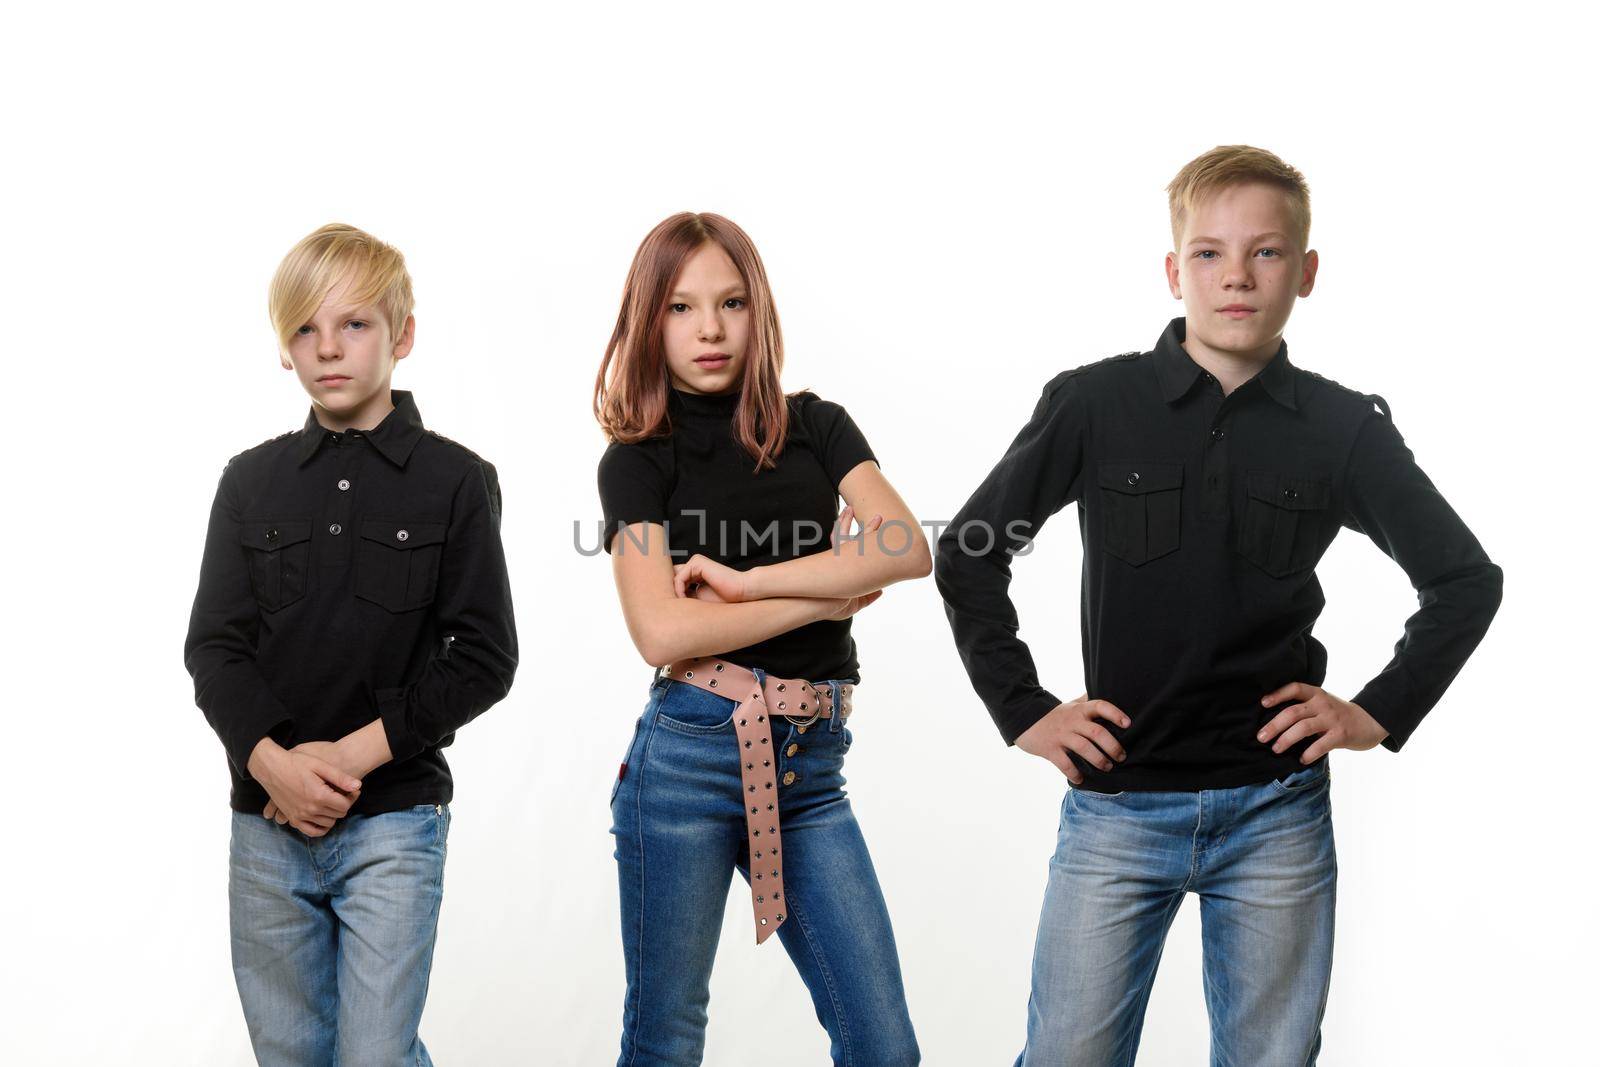 Portrait of teenagers - two boys and girls of European appearance in dark casual clothes on a white background